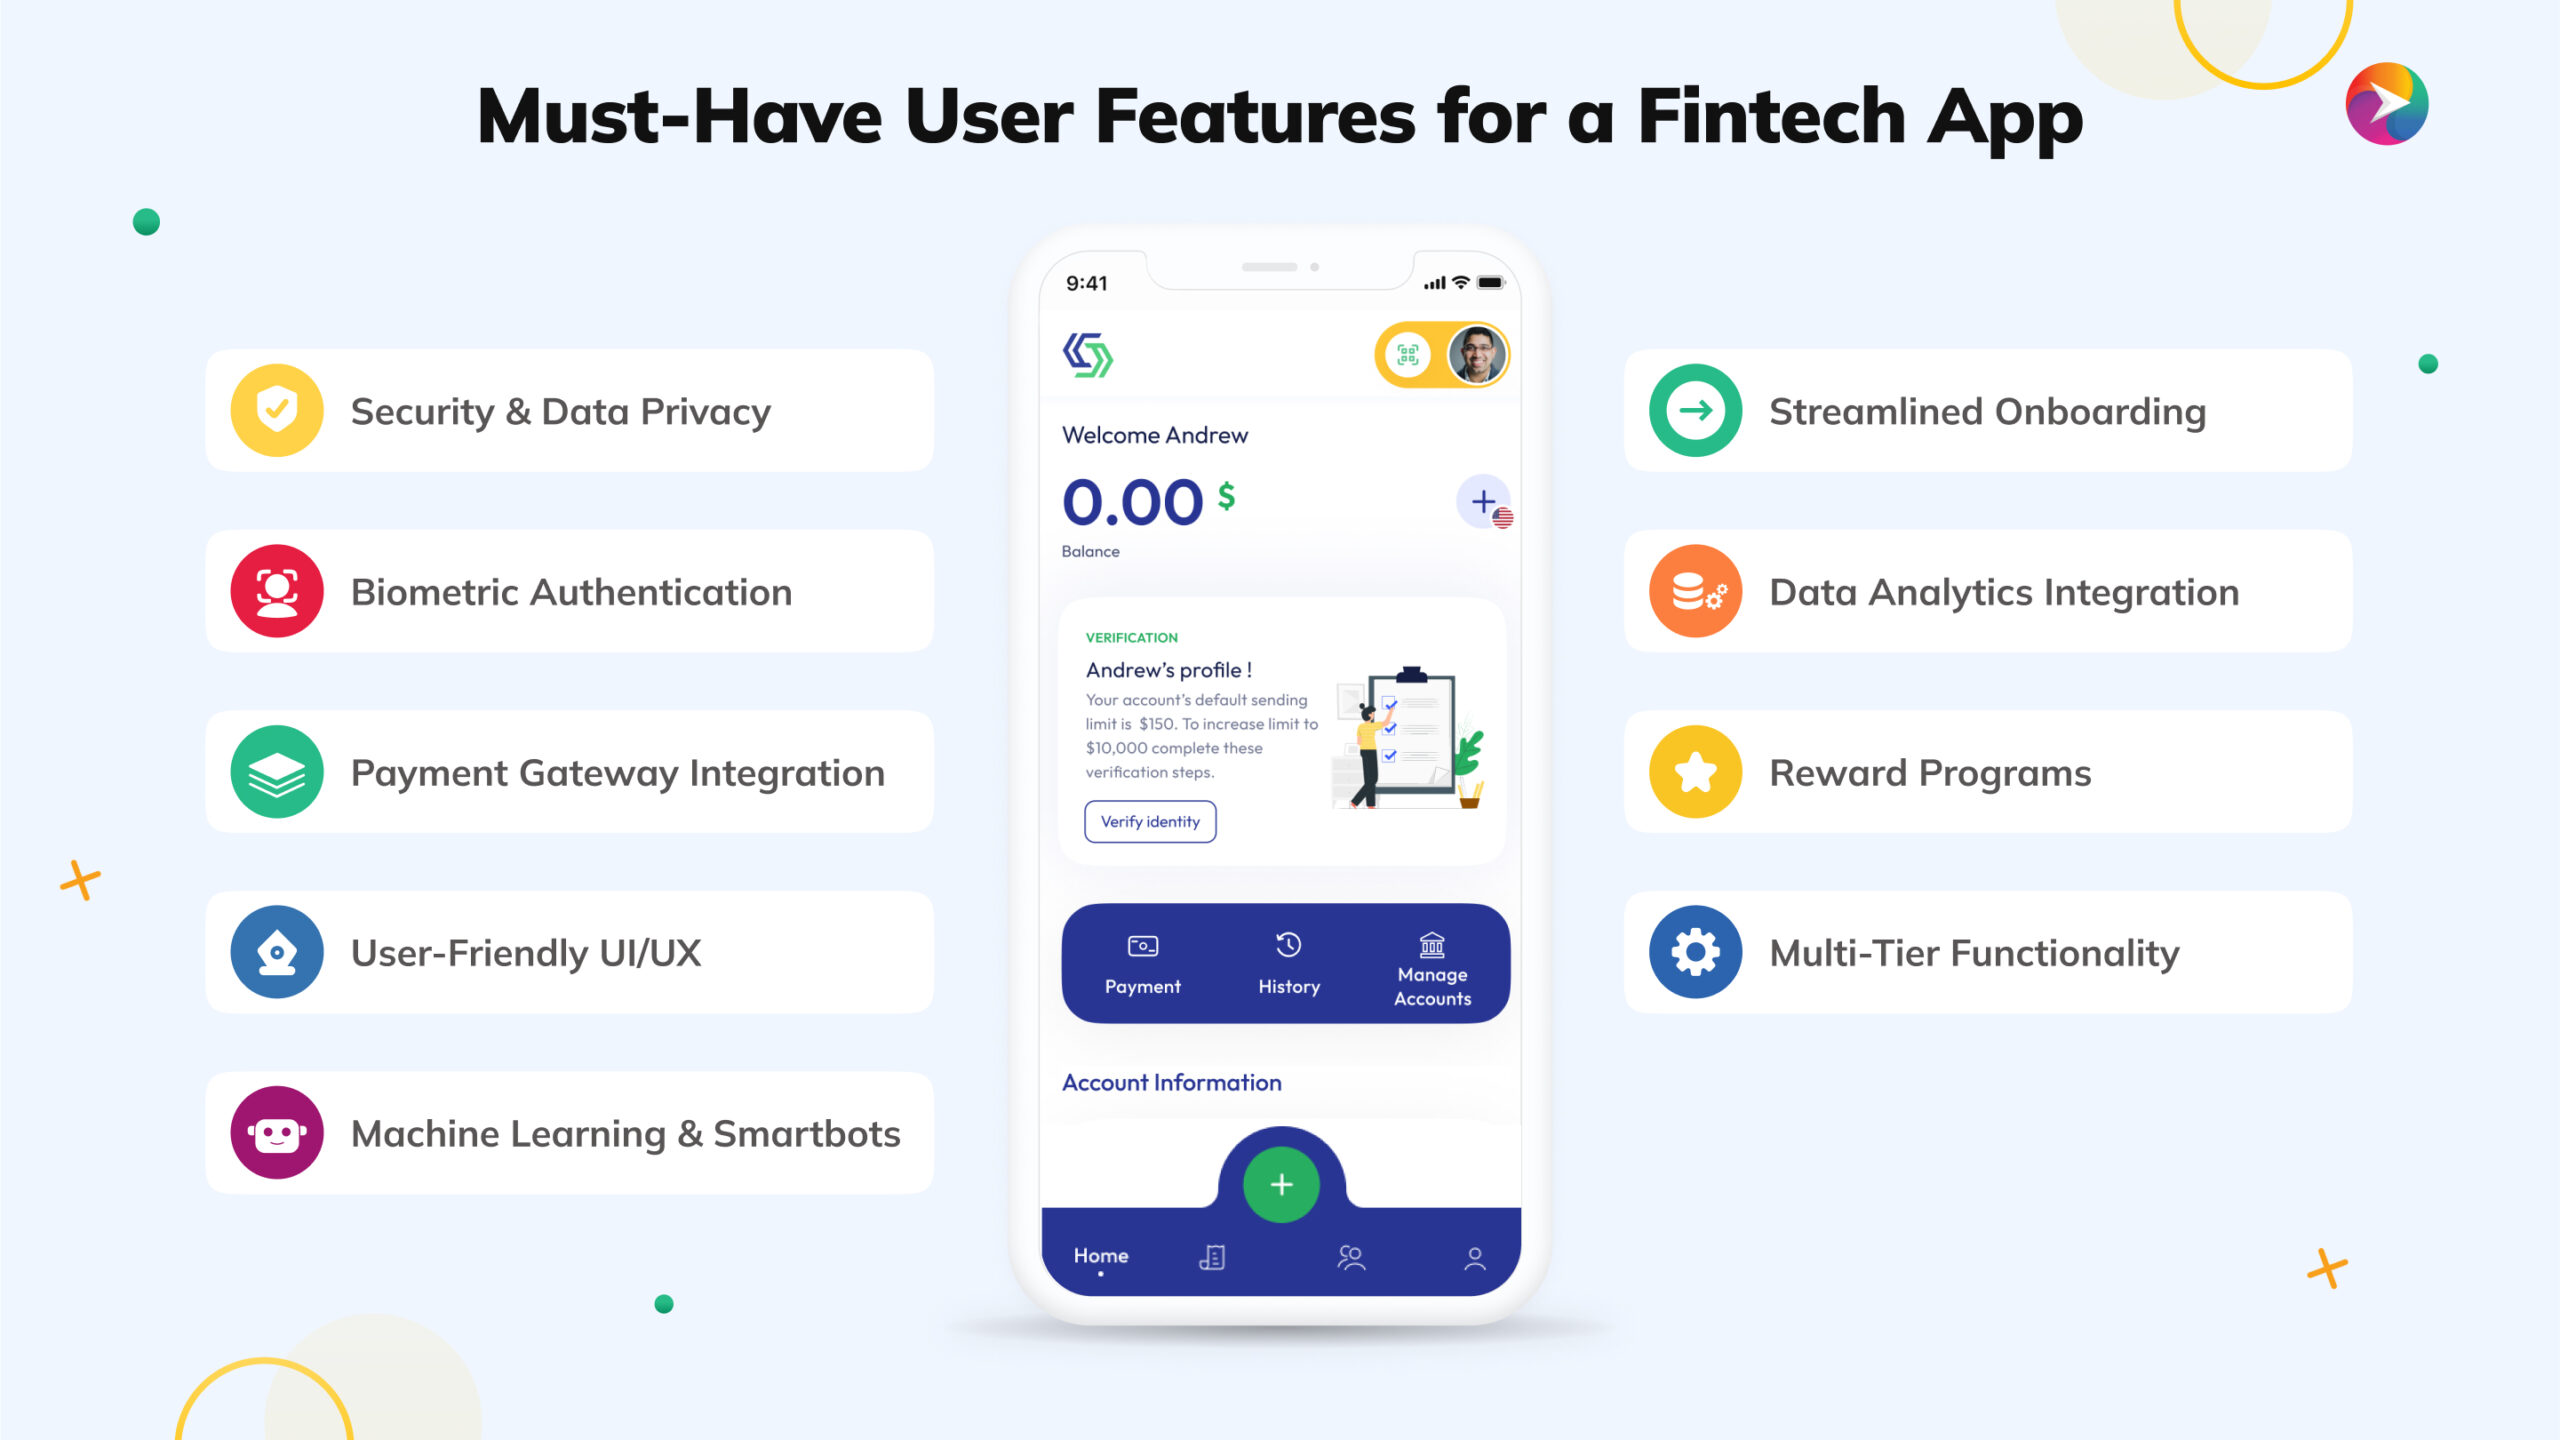 Must-Have User Features for a Fintech App